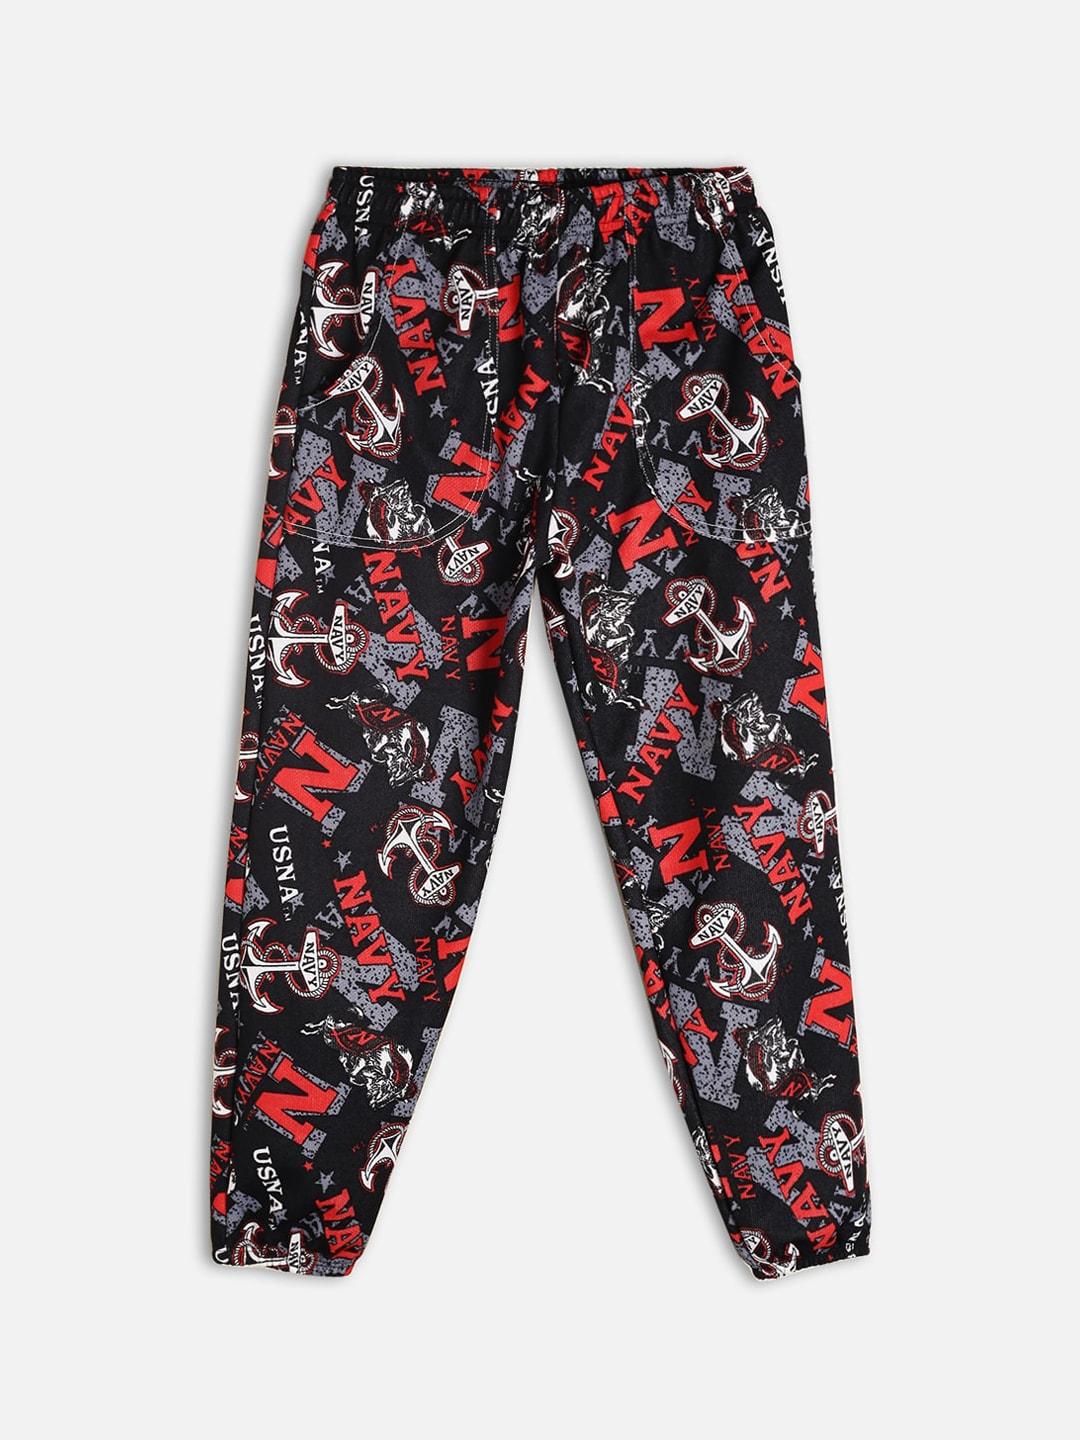 fashionable boys black & red typography printed joggers